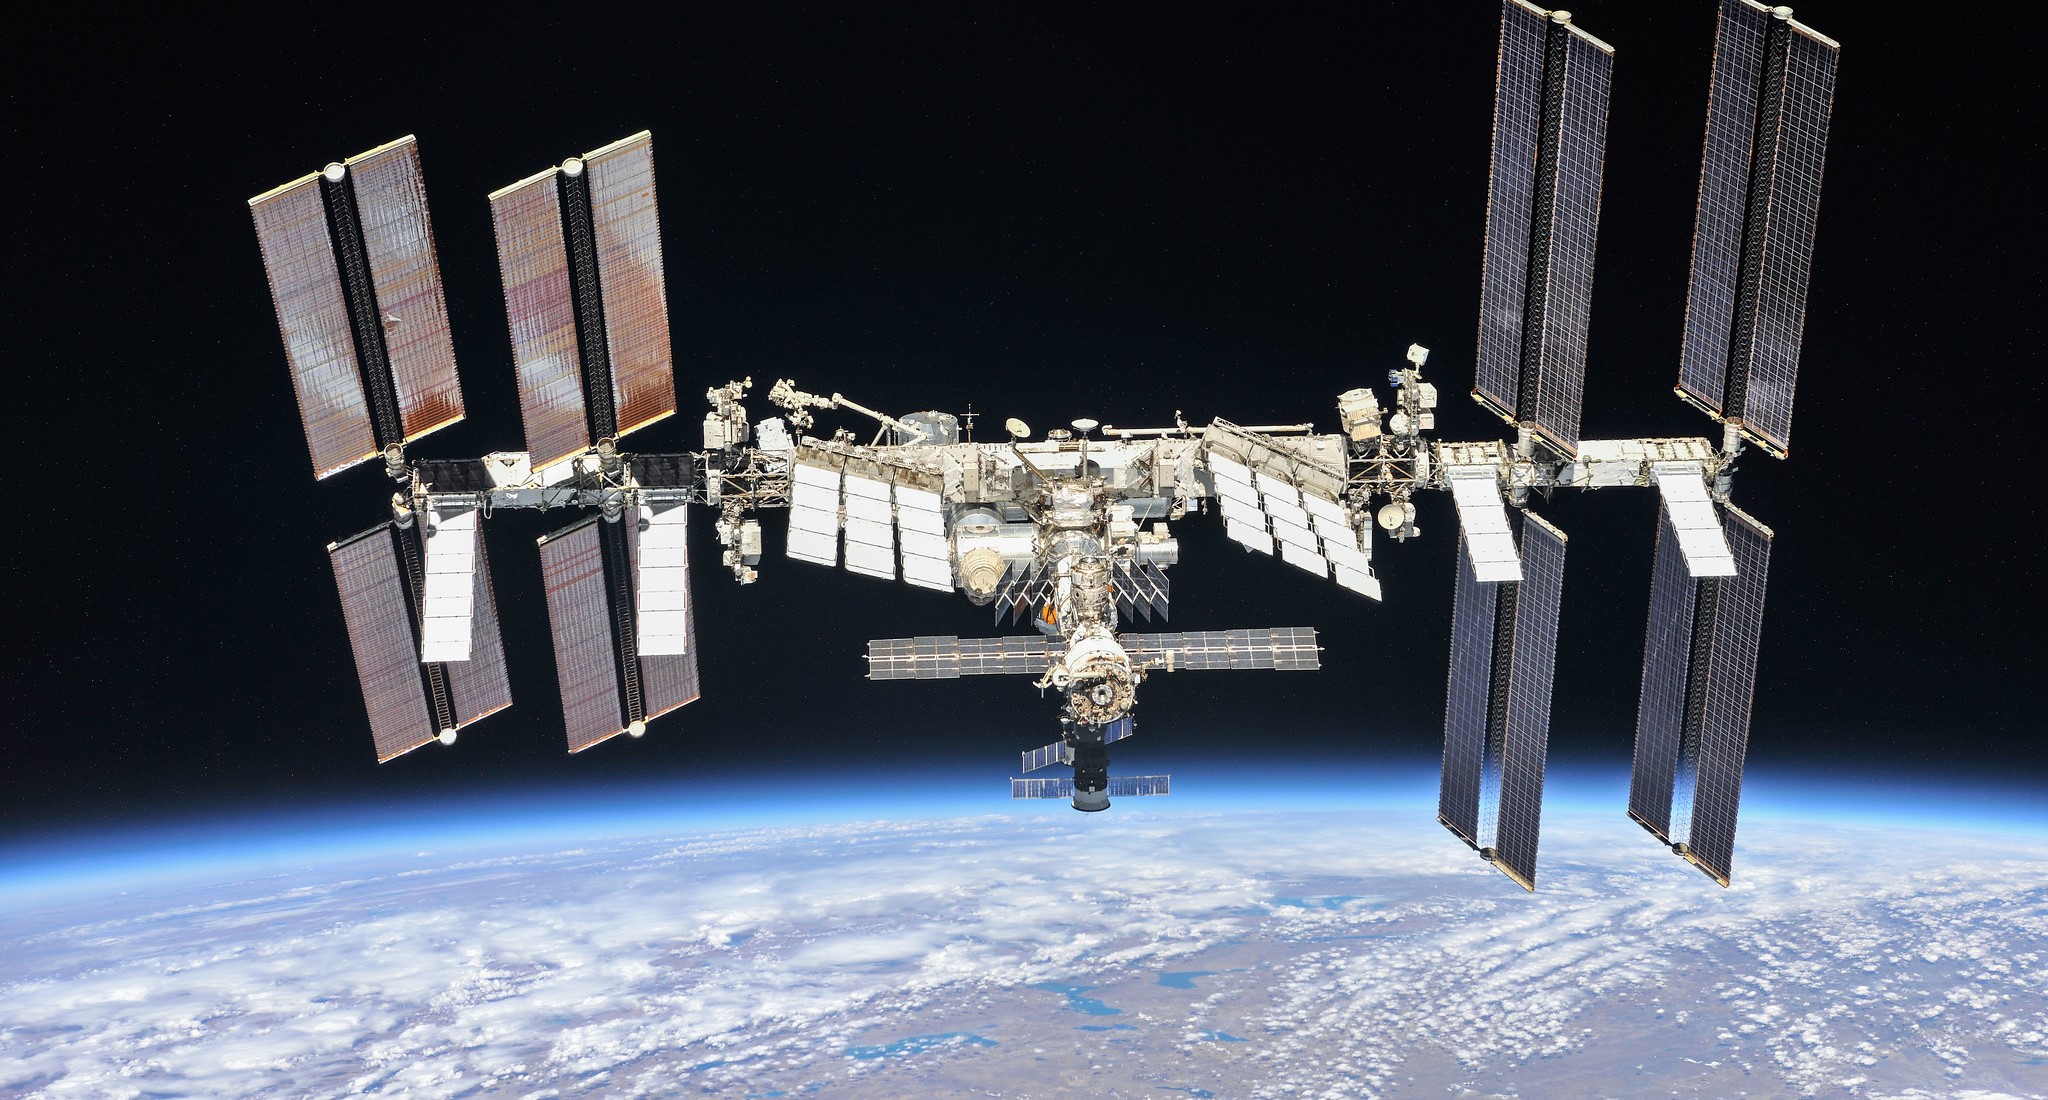 The ISS as imaged by astronauts in the Soyuz capsule.